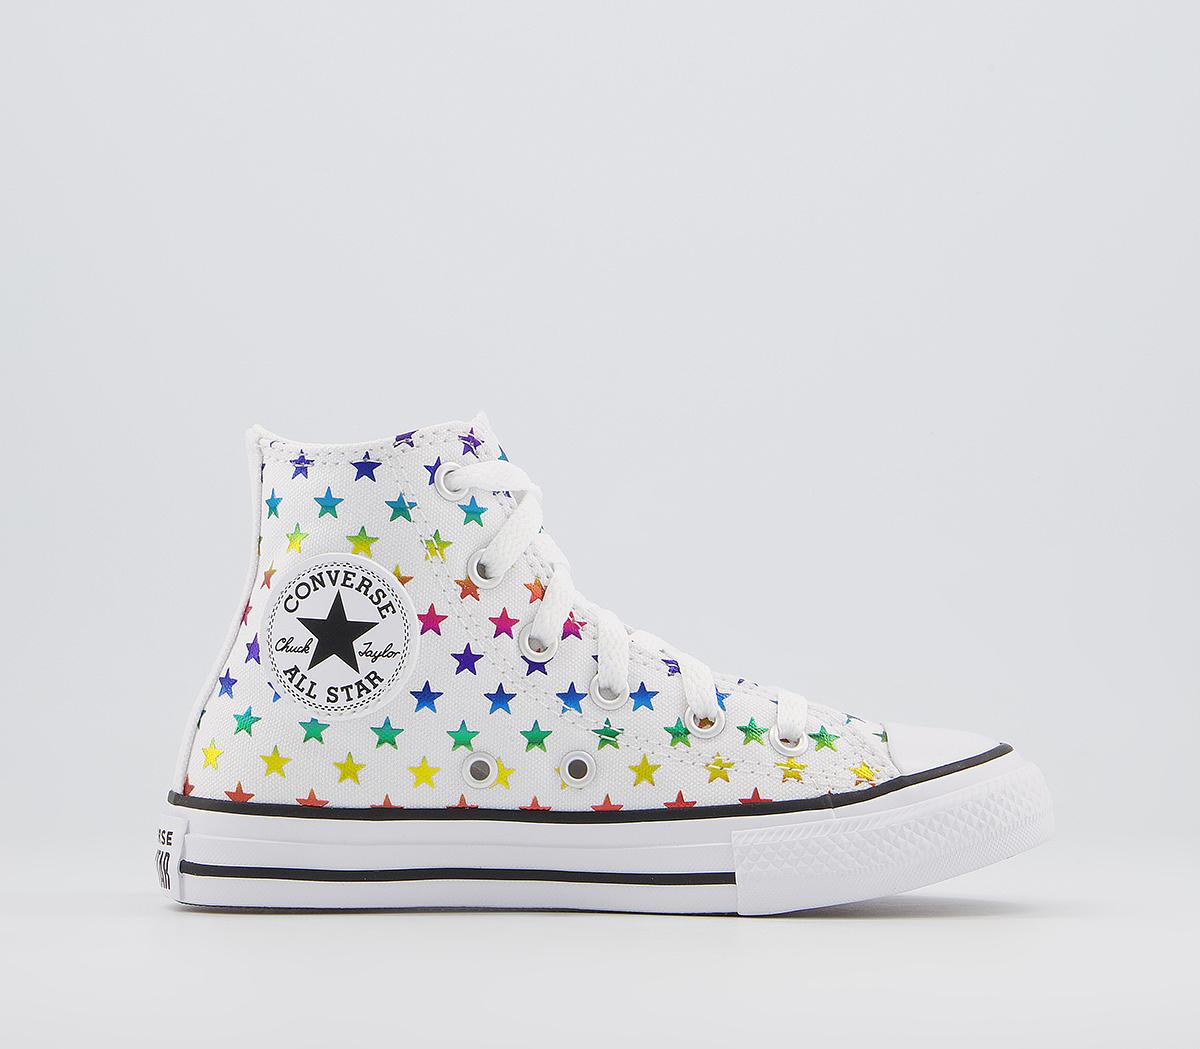 ConverseAll Star Hi Youth TrainersWhite Black White Foil Star